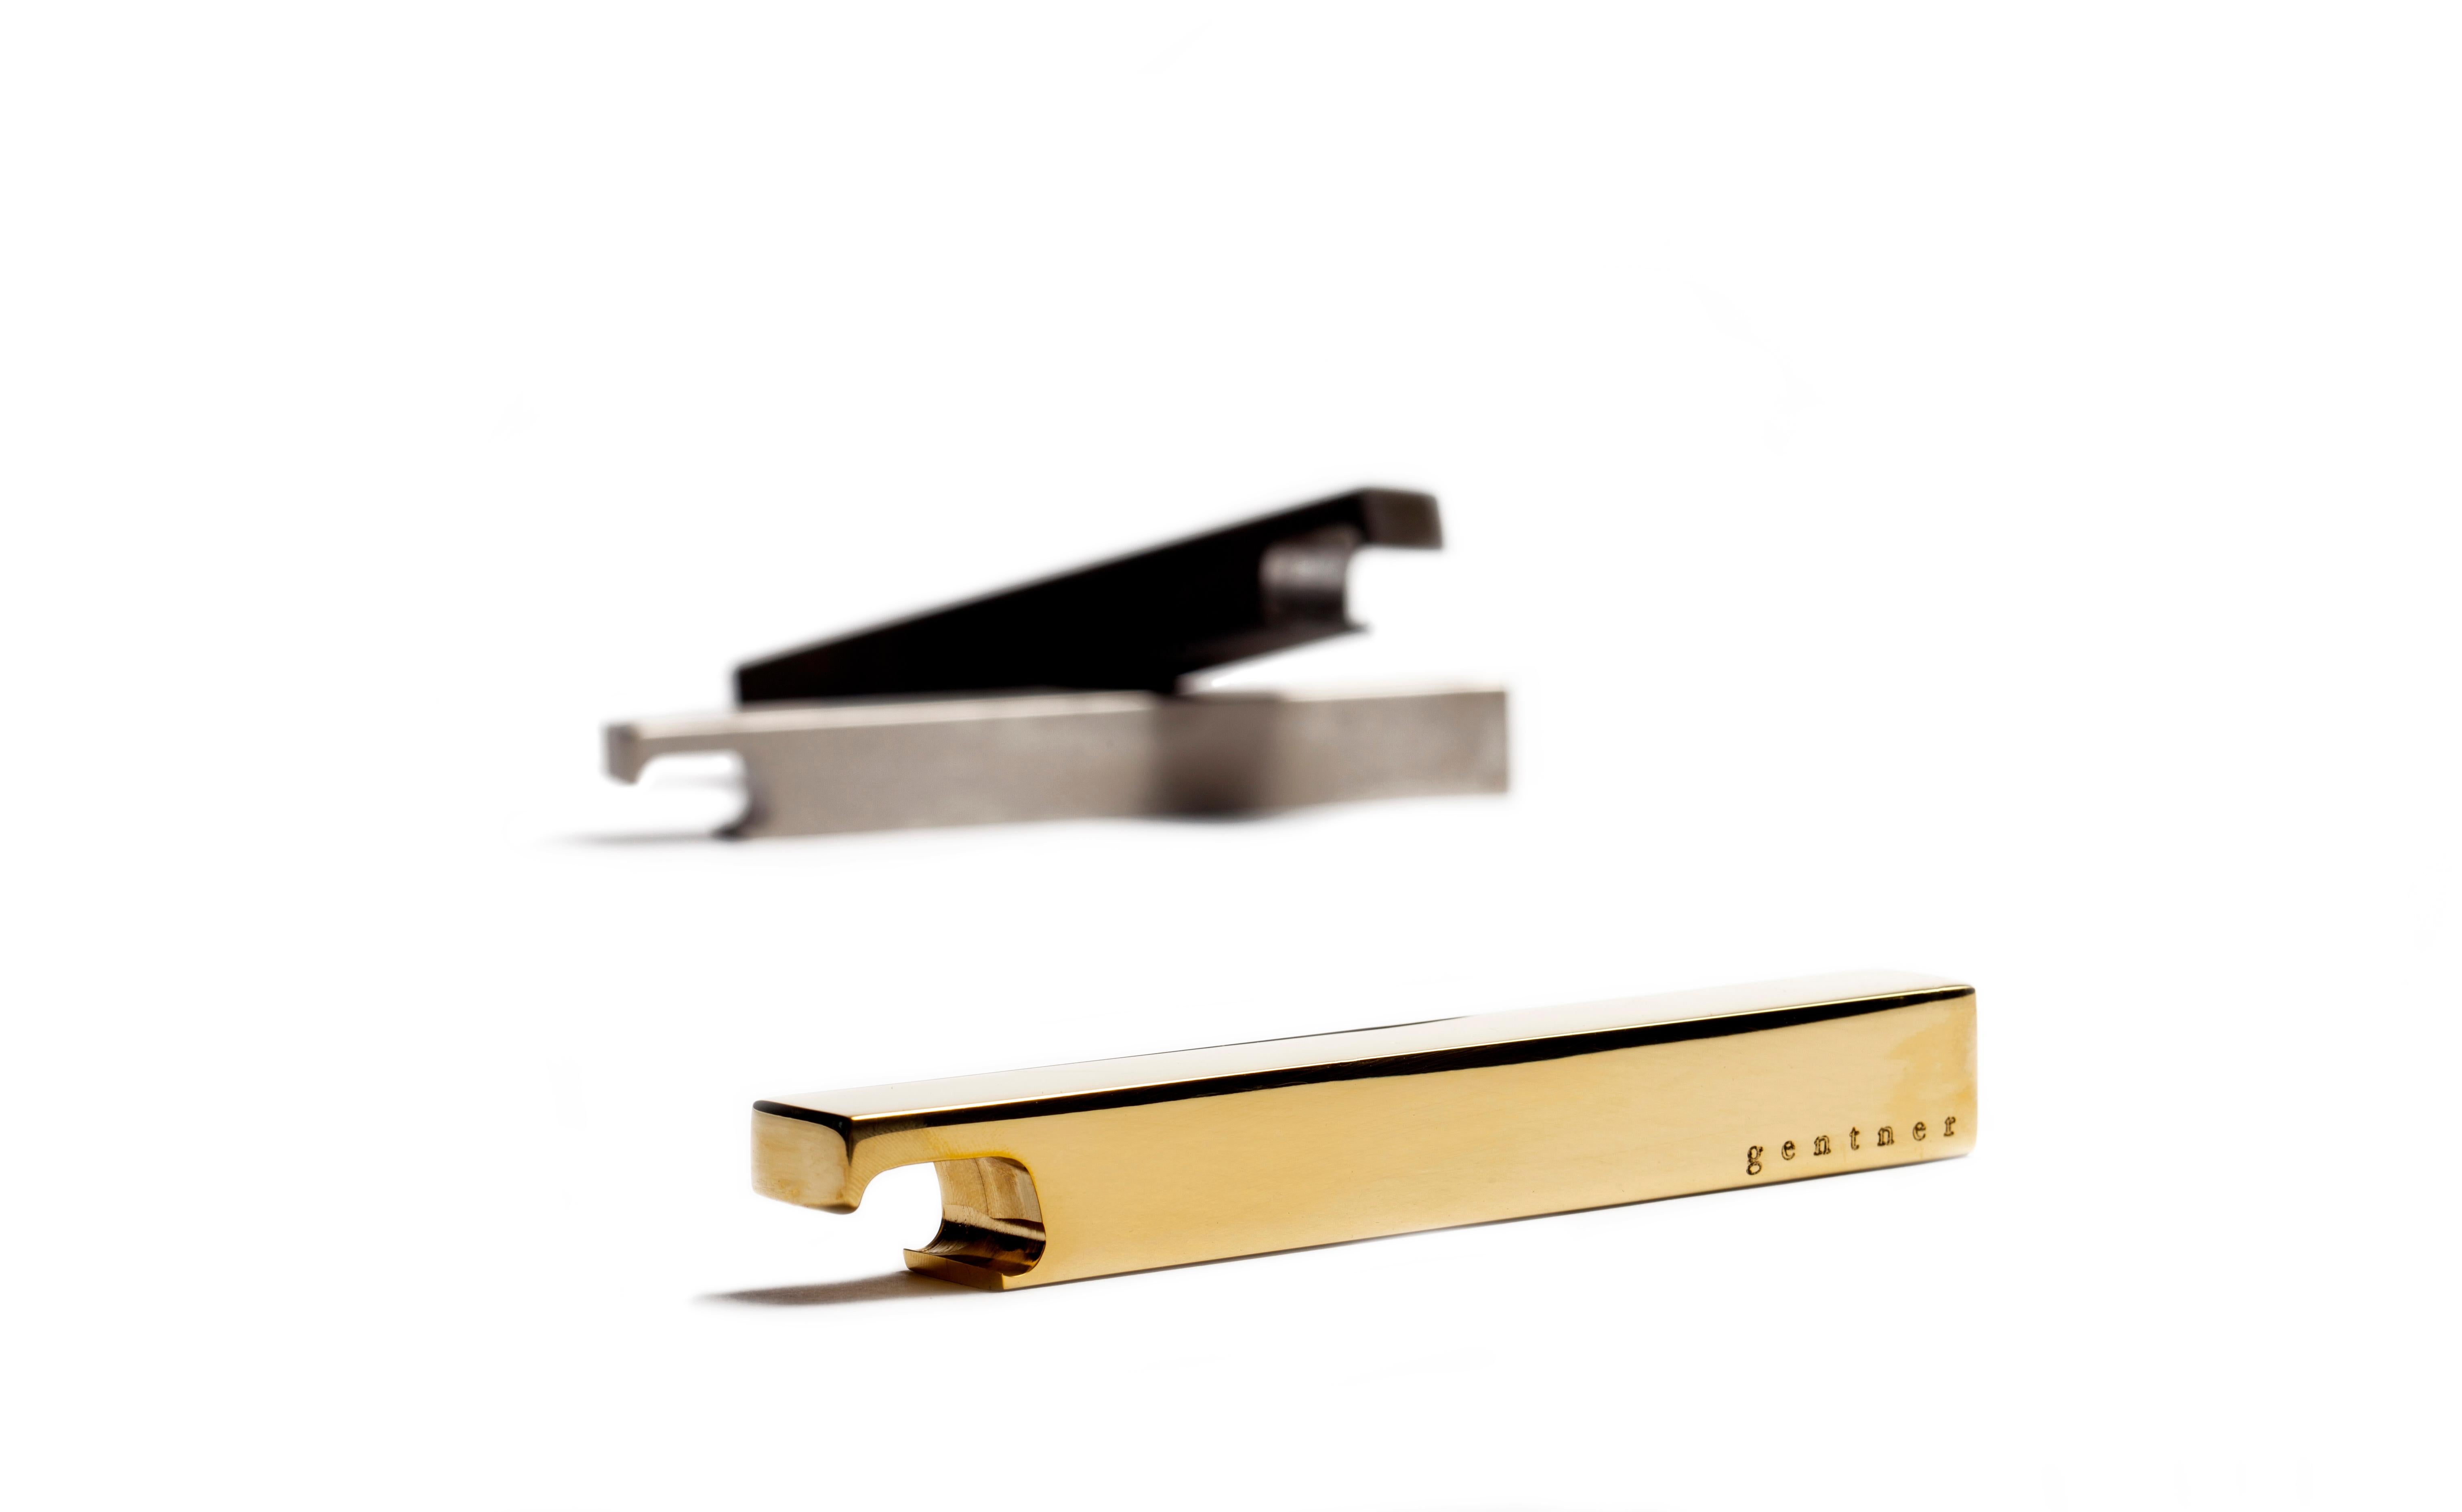 Brass bottle opener by Gentner Design.
Dimensions: D 14 x W 1.9 x H 1.9 cm.
Materials: polished brass.

Strong in form and heavy in weight, the bottle openers are elegant in their simplicity and precision. Solid bar stock is transformed through